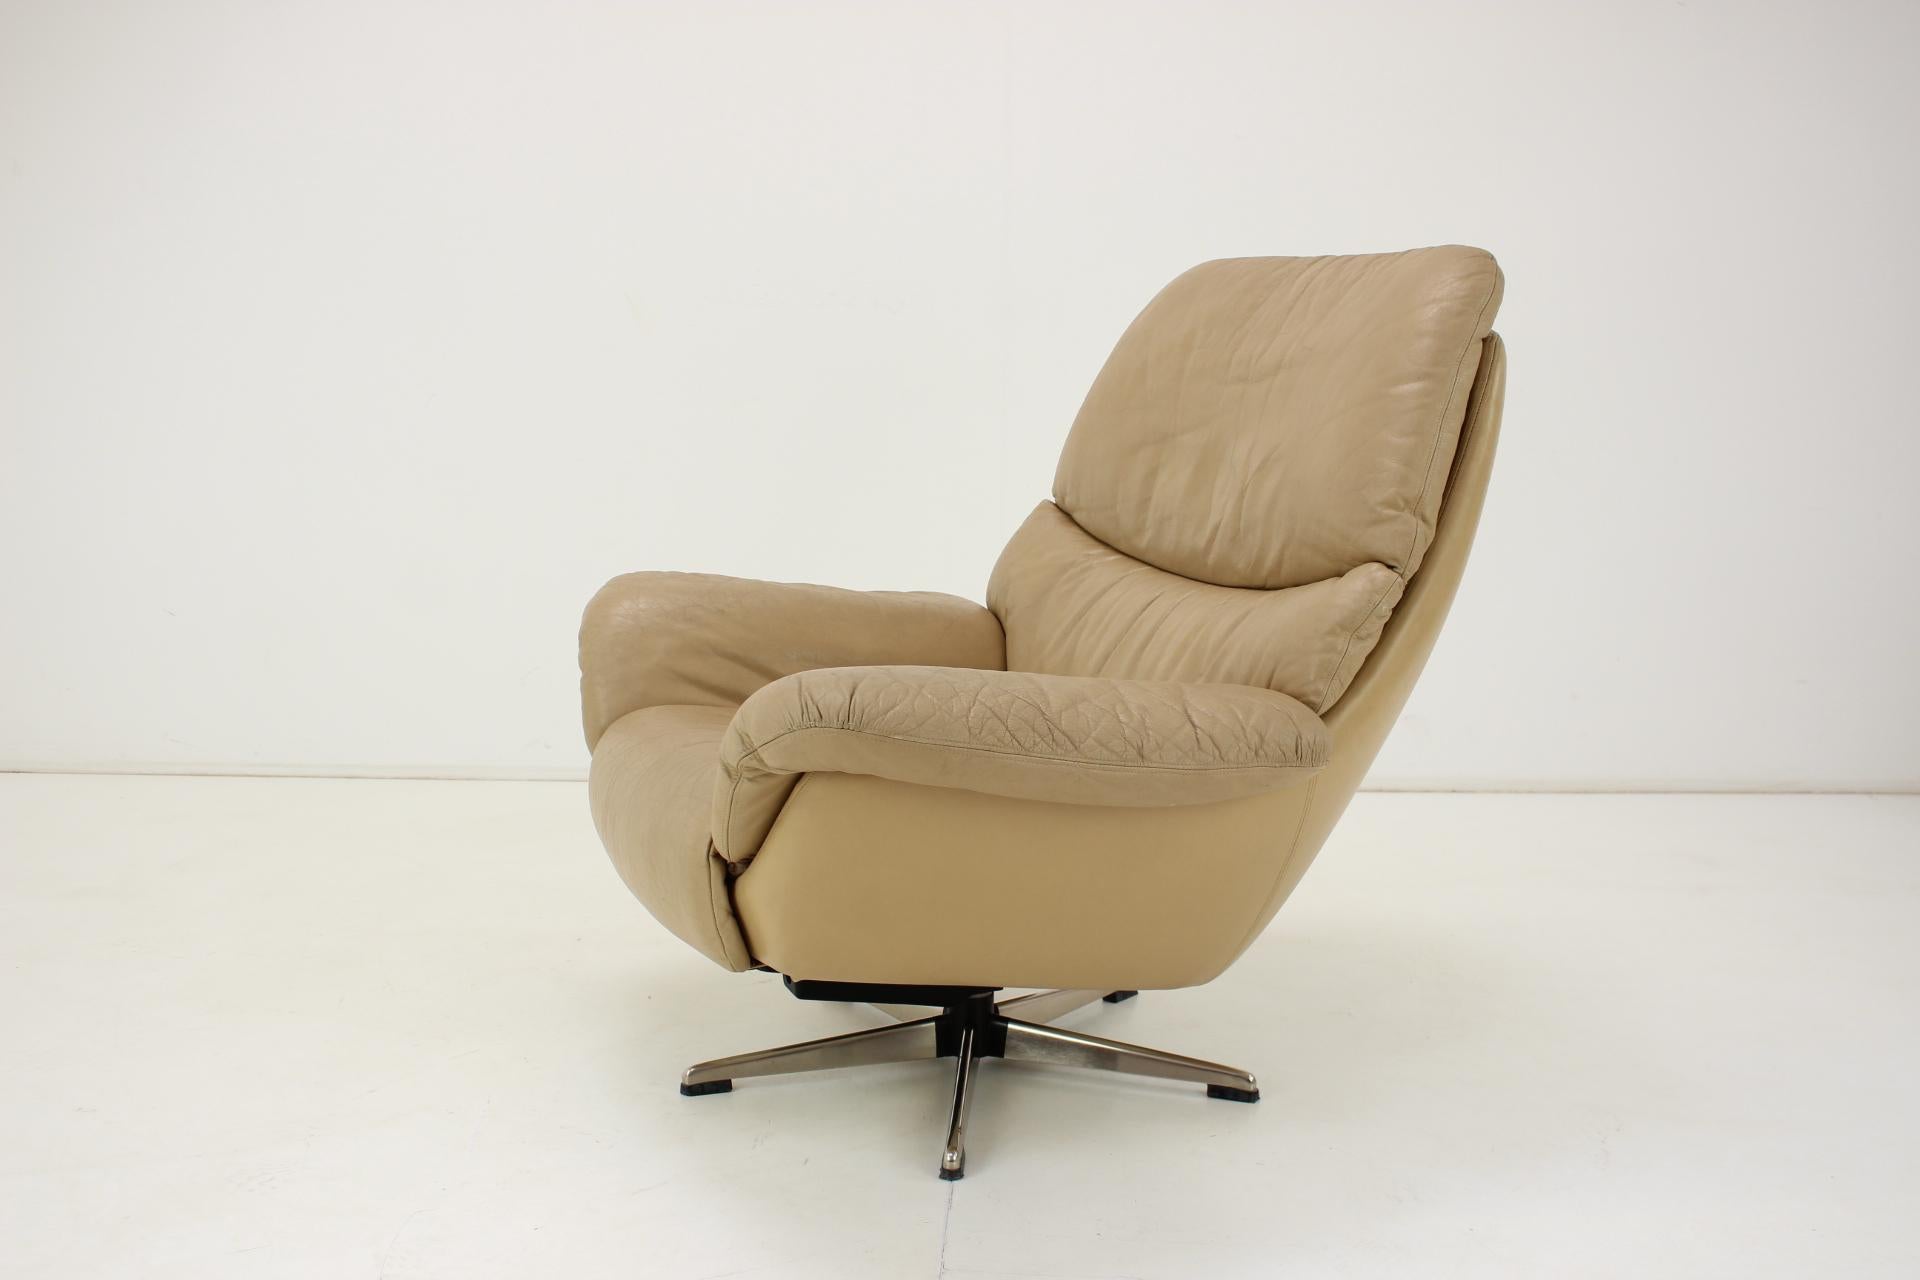 Large Scandinavian Adjustable Leather Armchair by Peem, 1970s, Finland For Sale 5